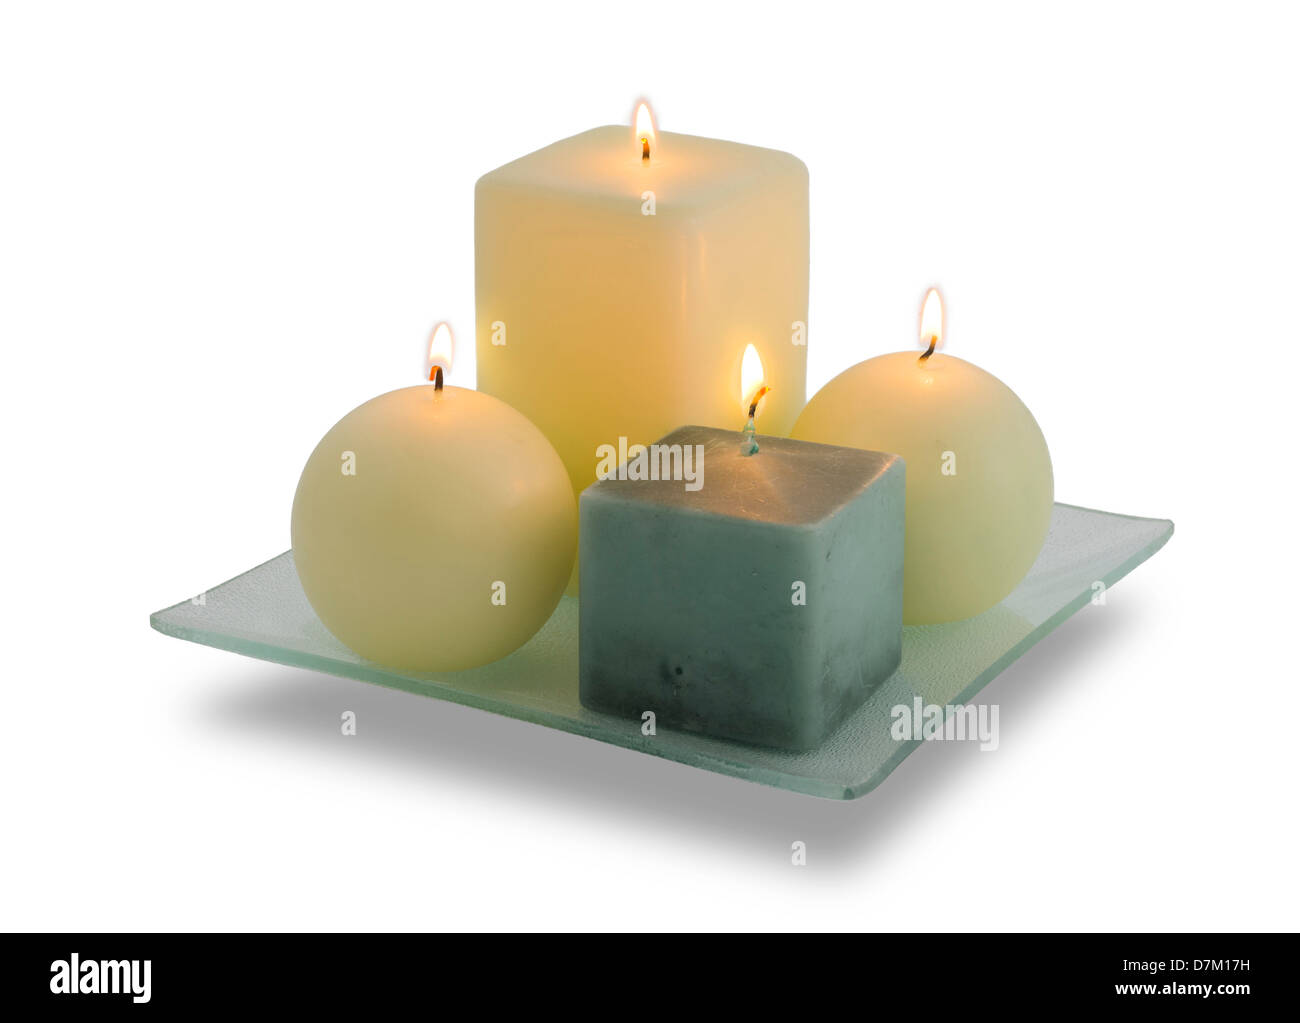 A set of four Christmas candles burning on a white background. Very clean image. Stock Photo